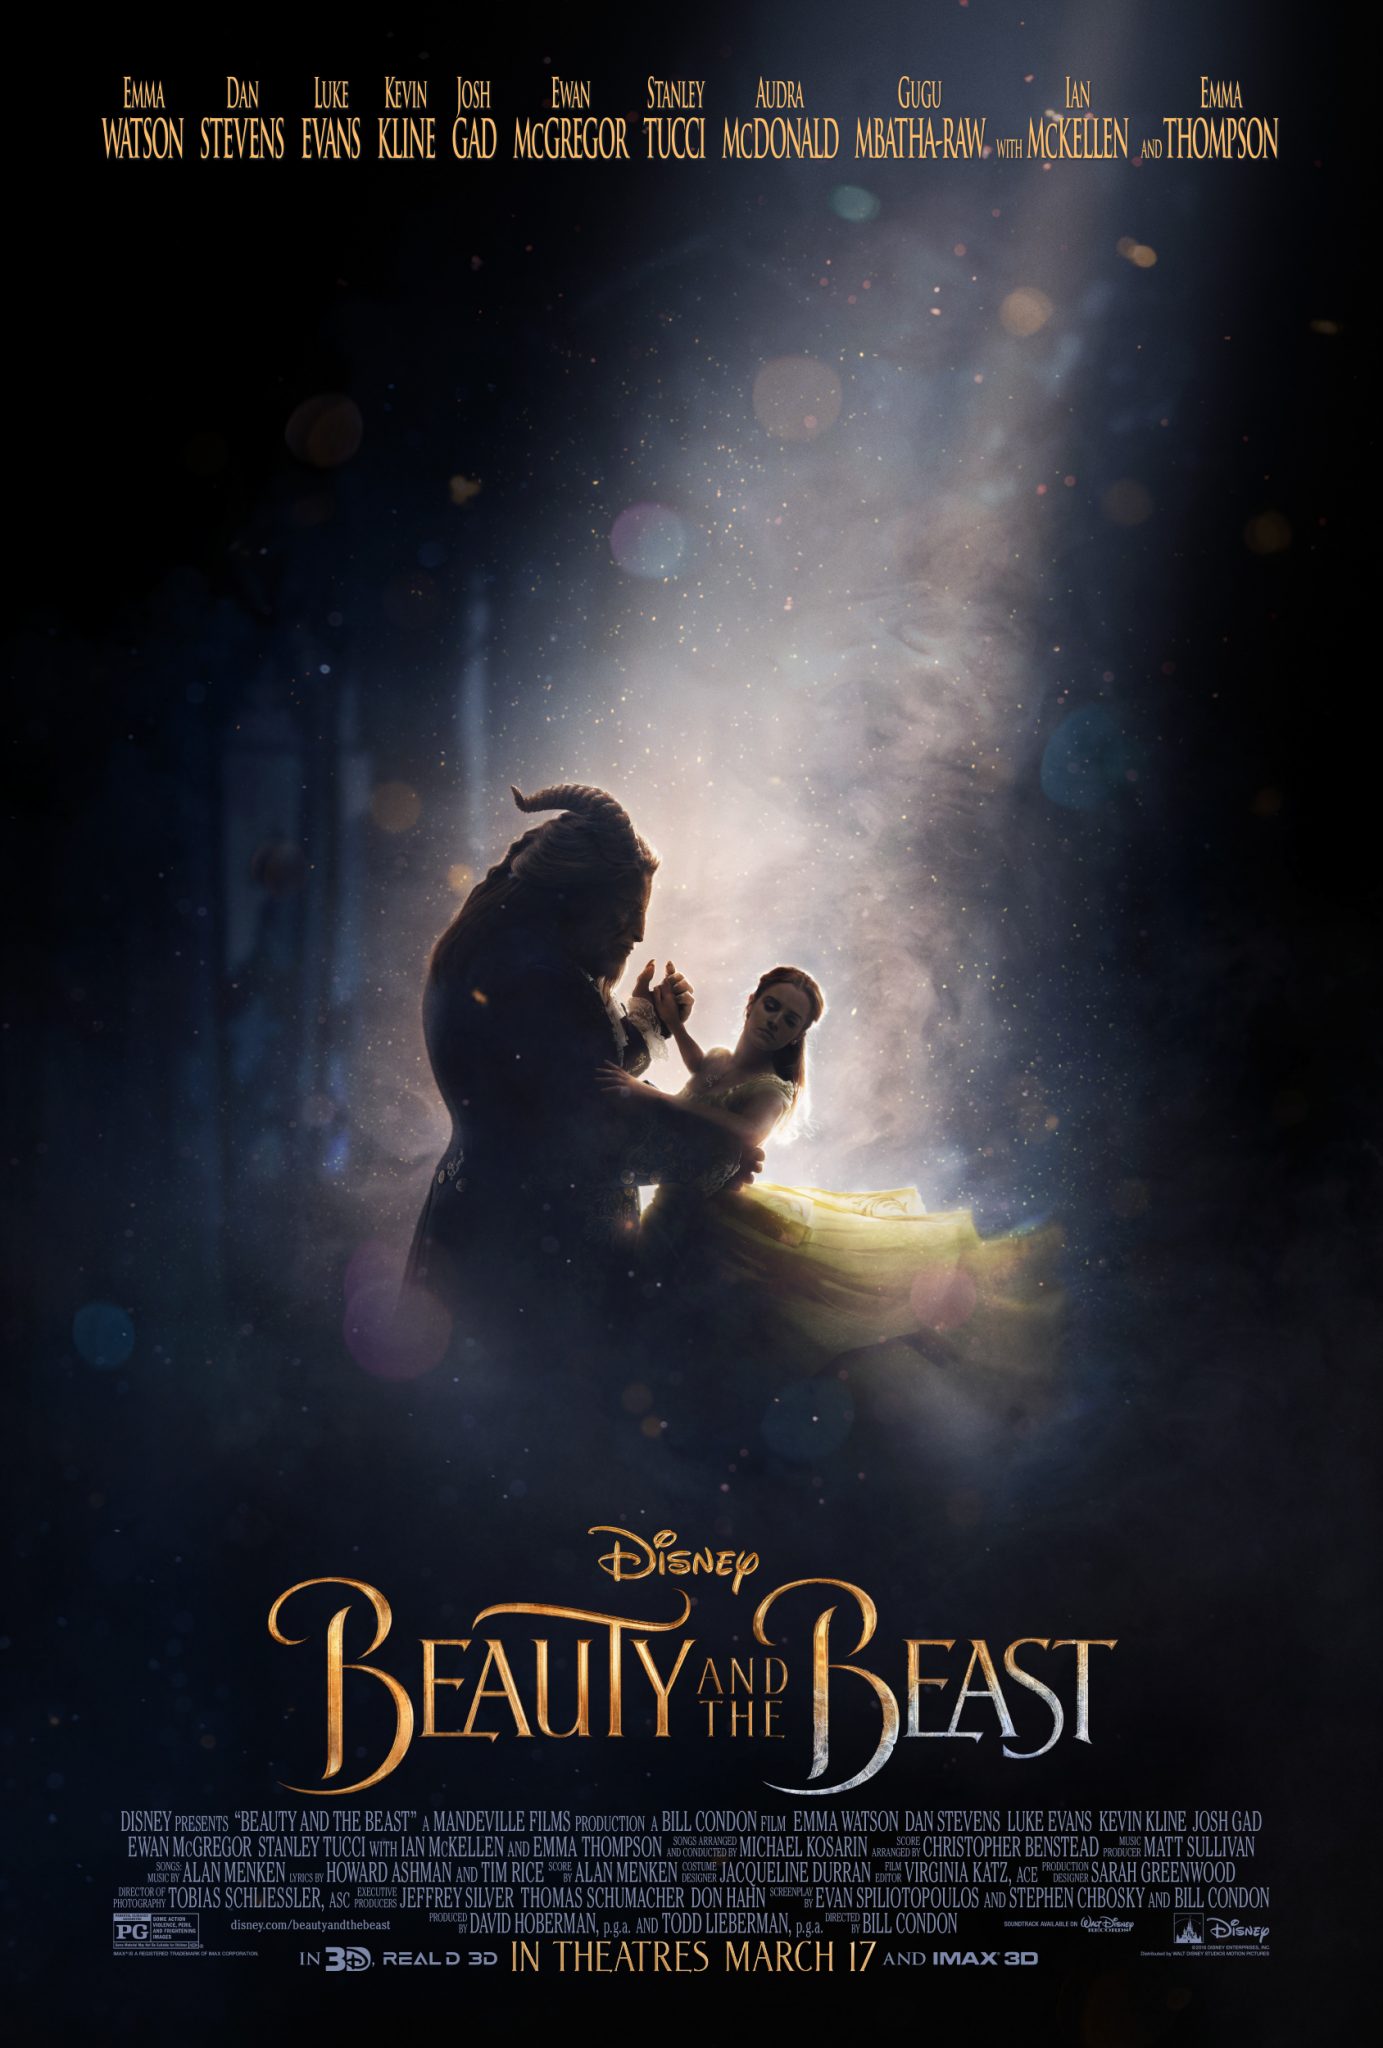 Disney's Beauty and the Beast Poster